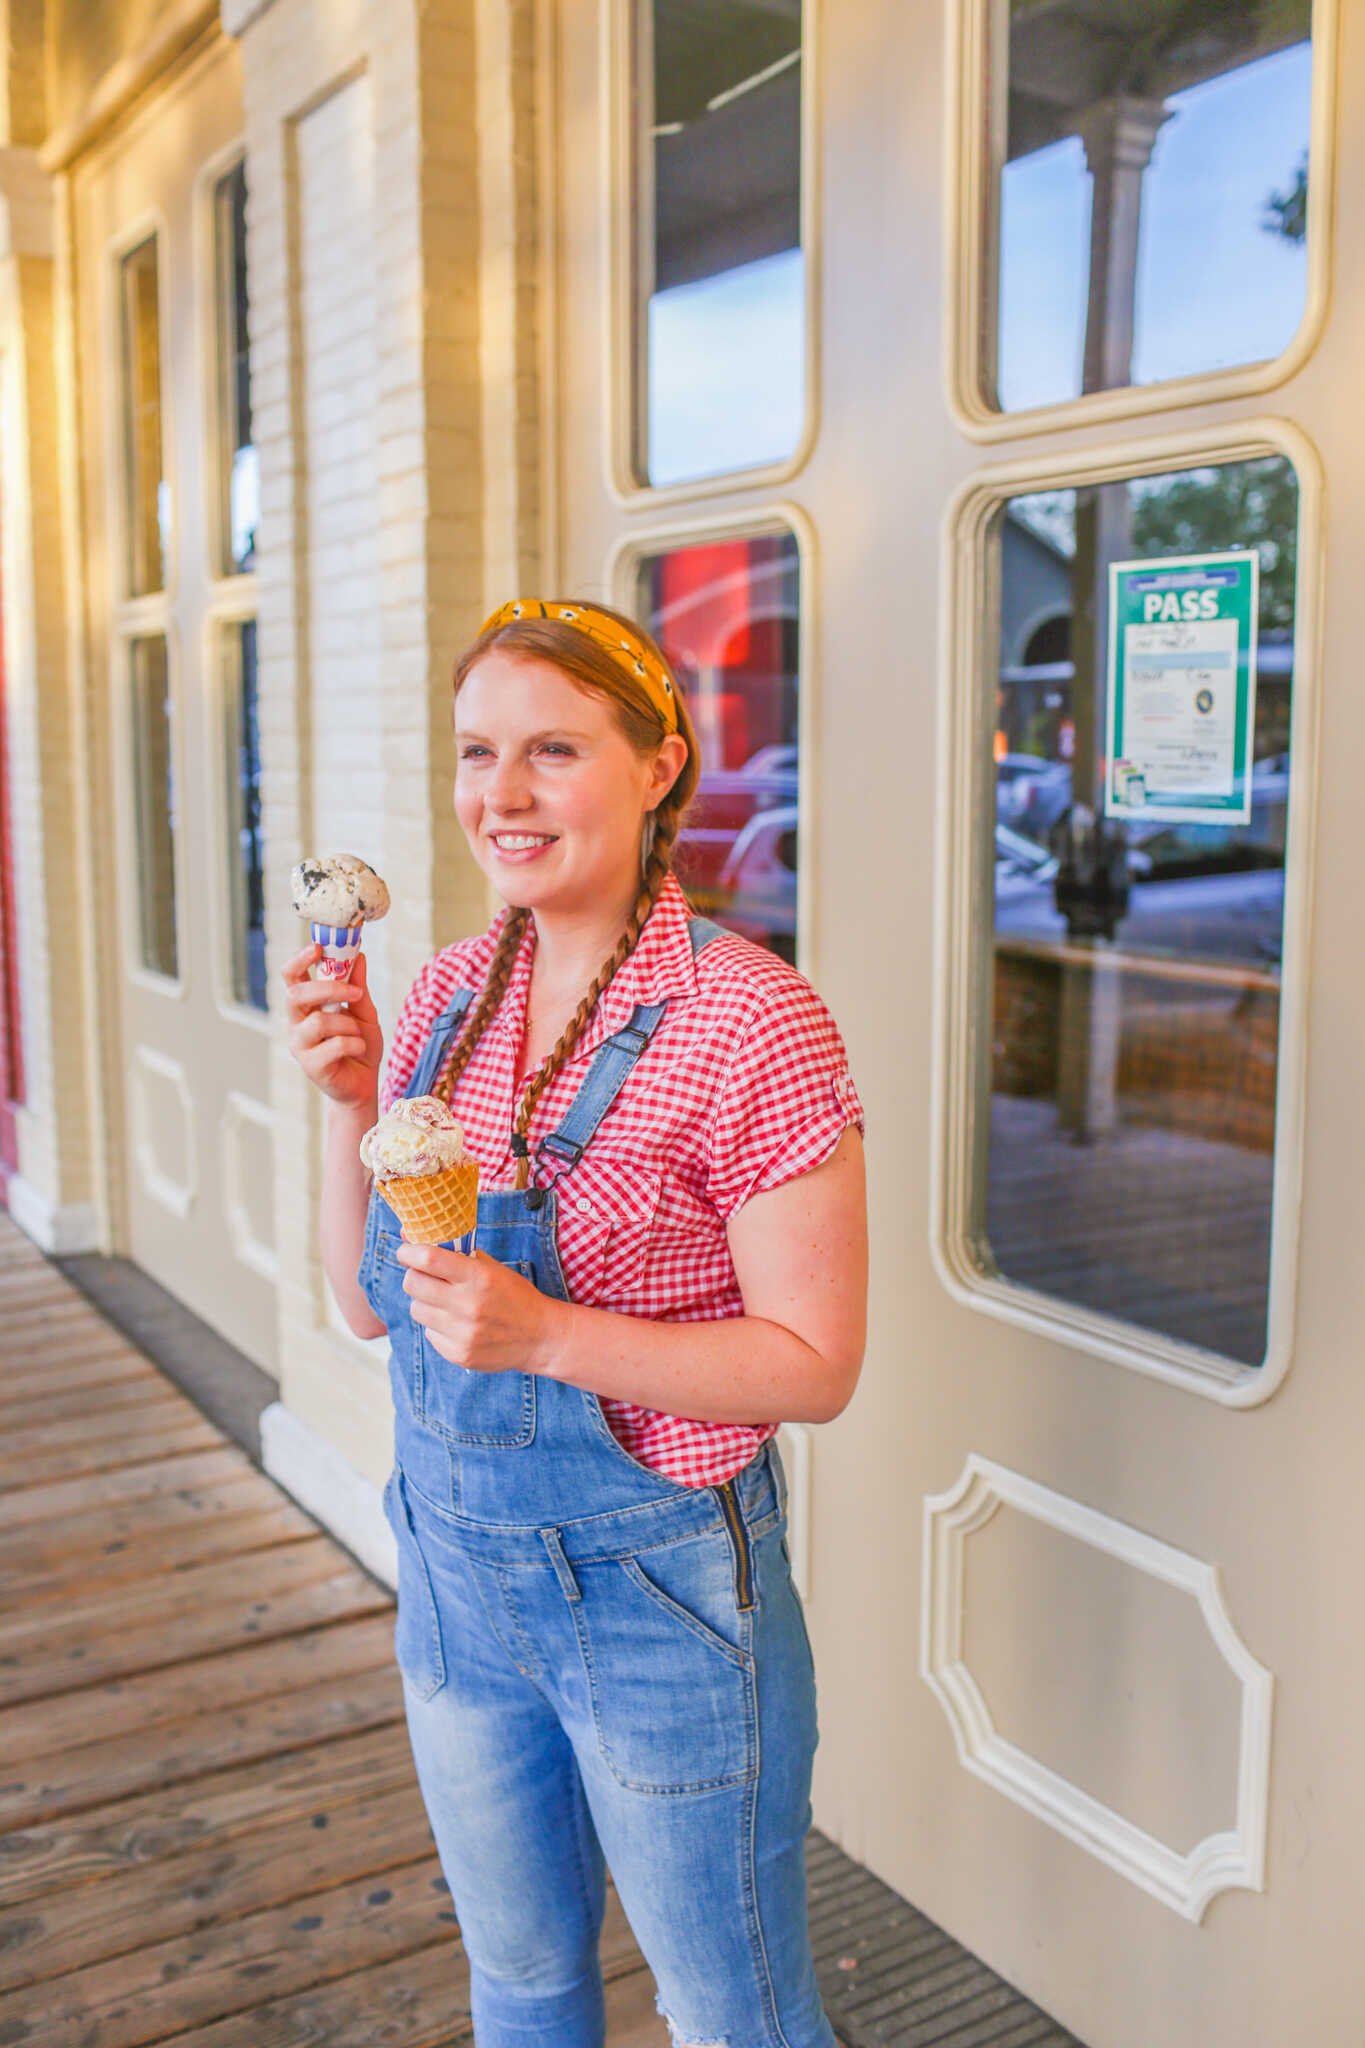 Visitor’s Guide to Old Sacramento - There’s multiple ice cream shops in Old Sacramento.